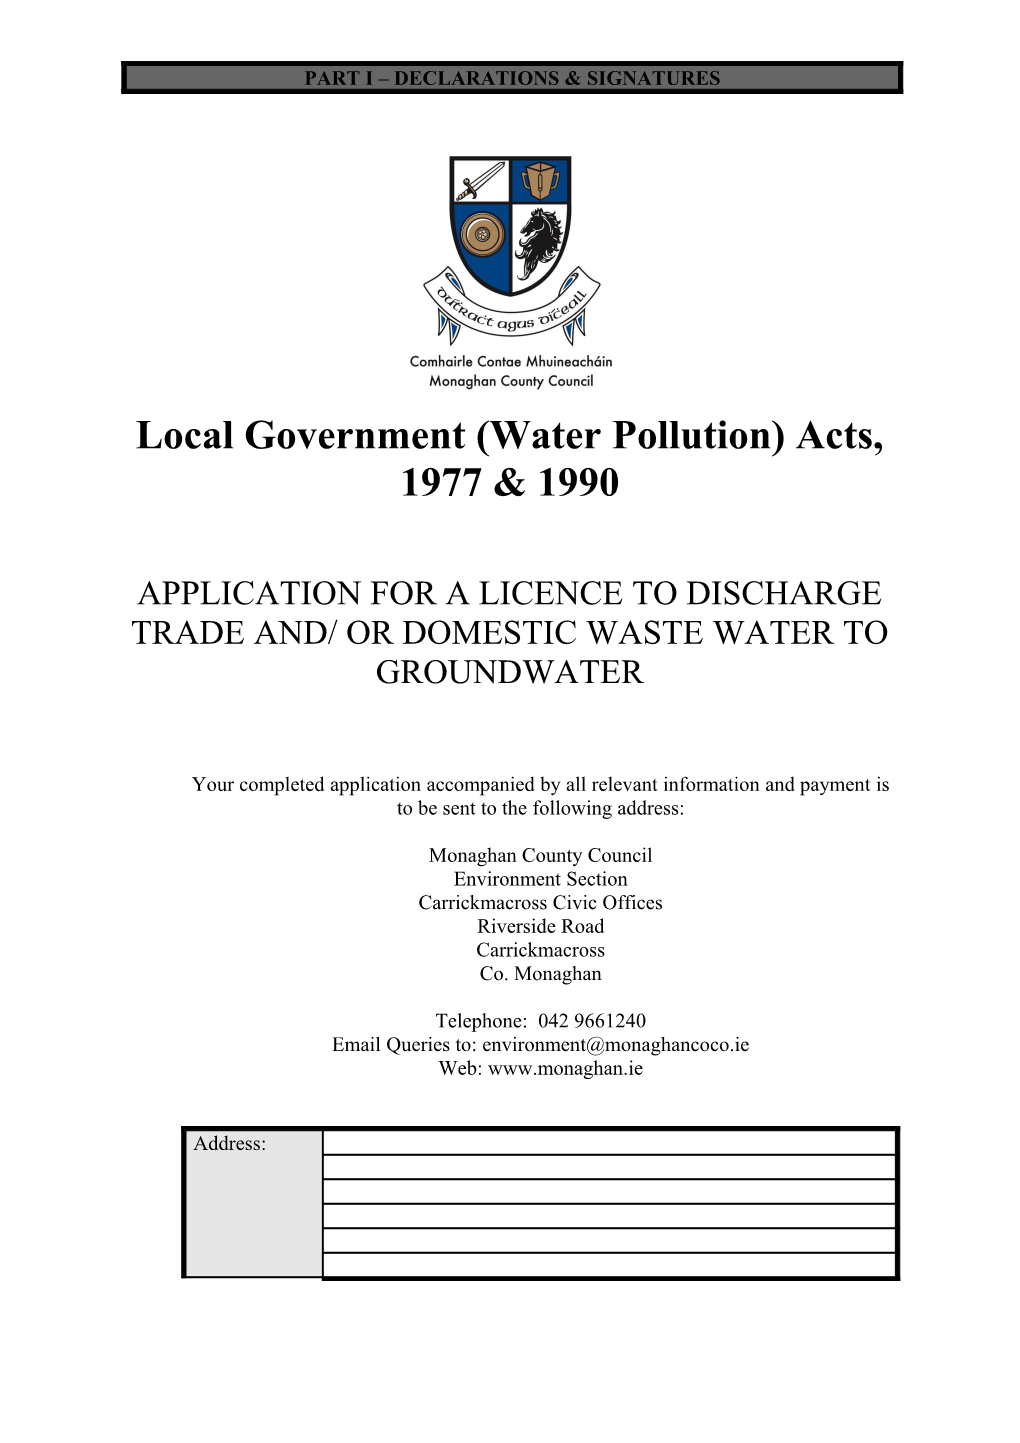 Local Government (Water Pollution) Acts, 1977 & 1990